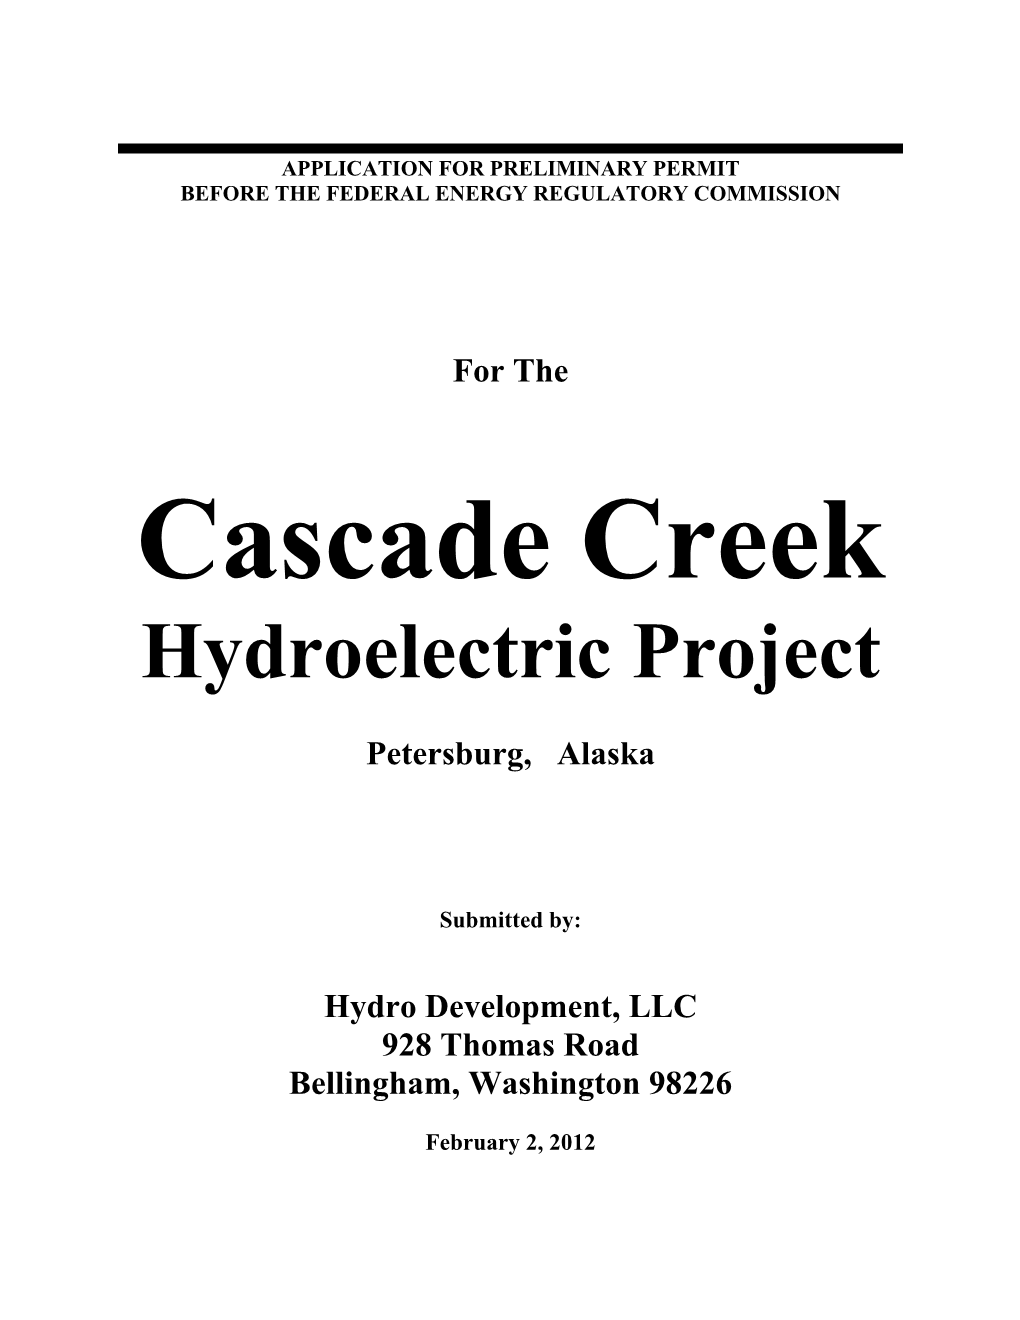 Hydroelectric Project